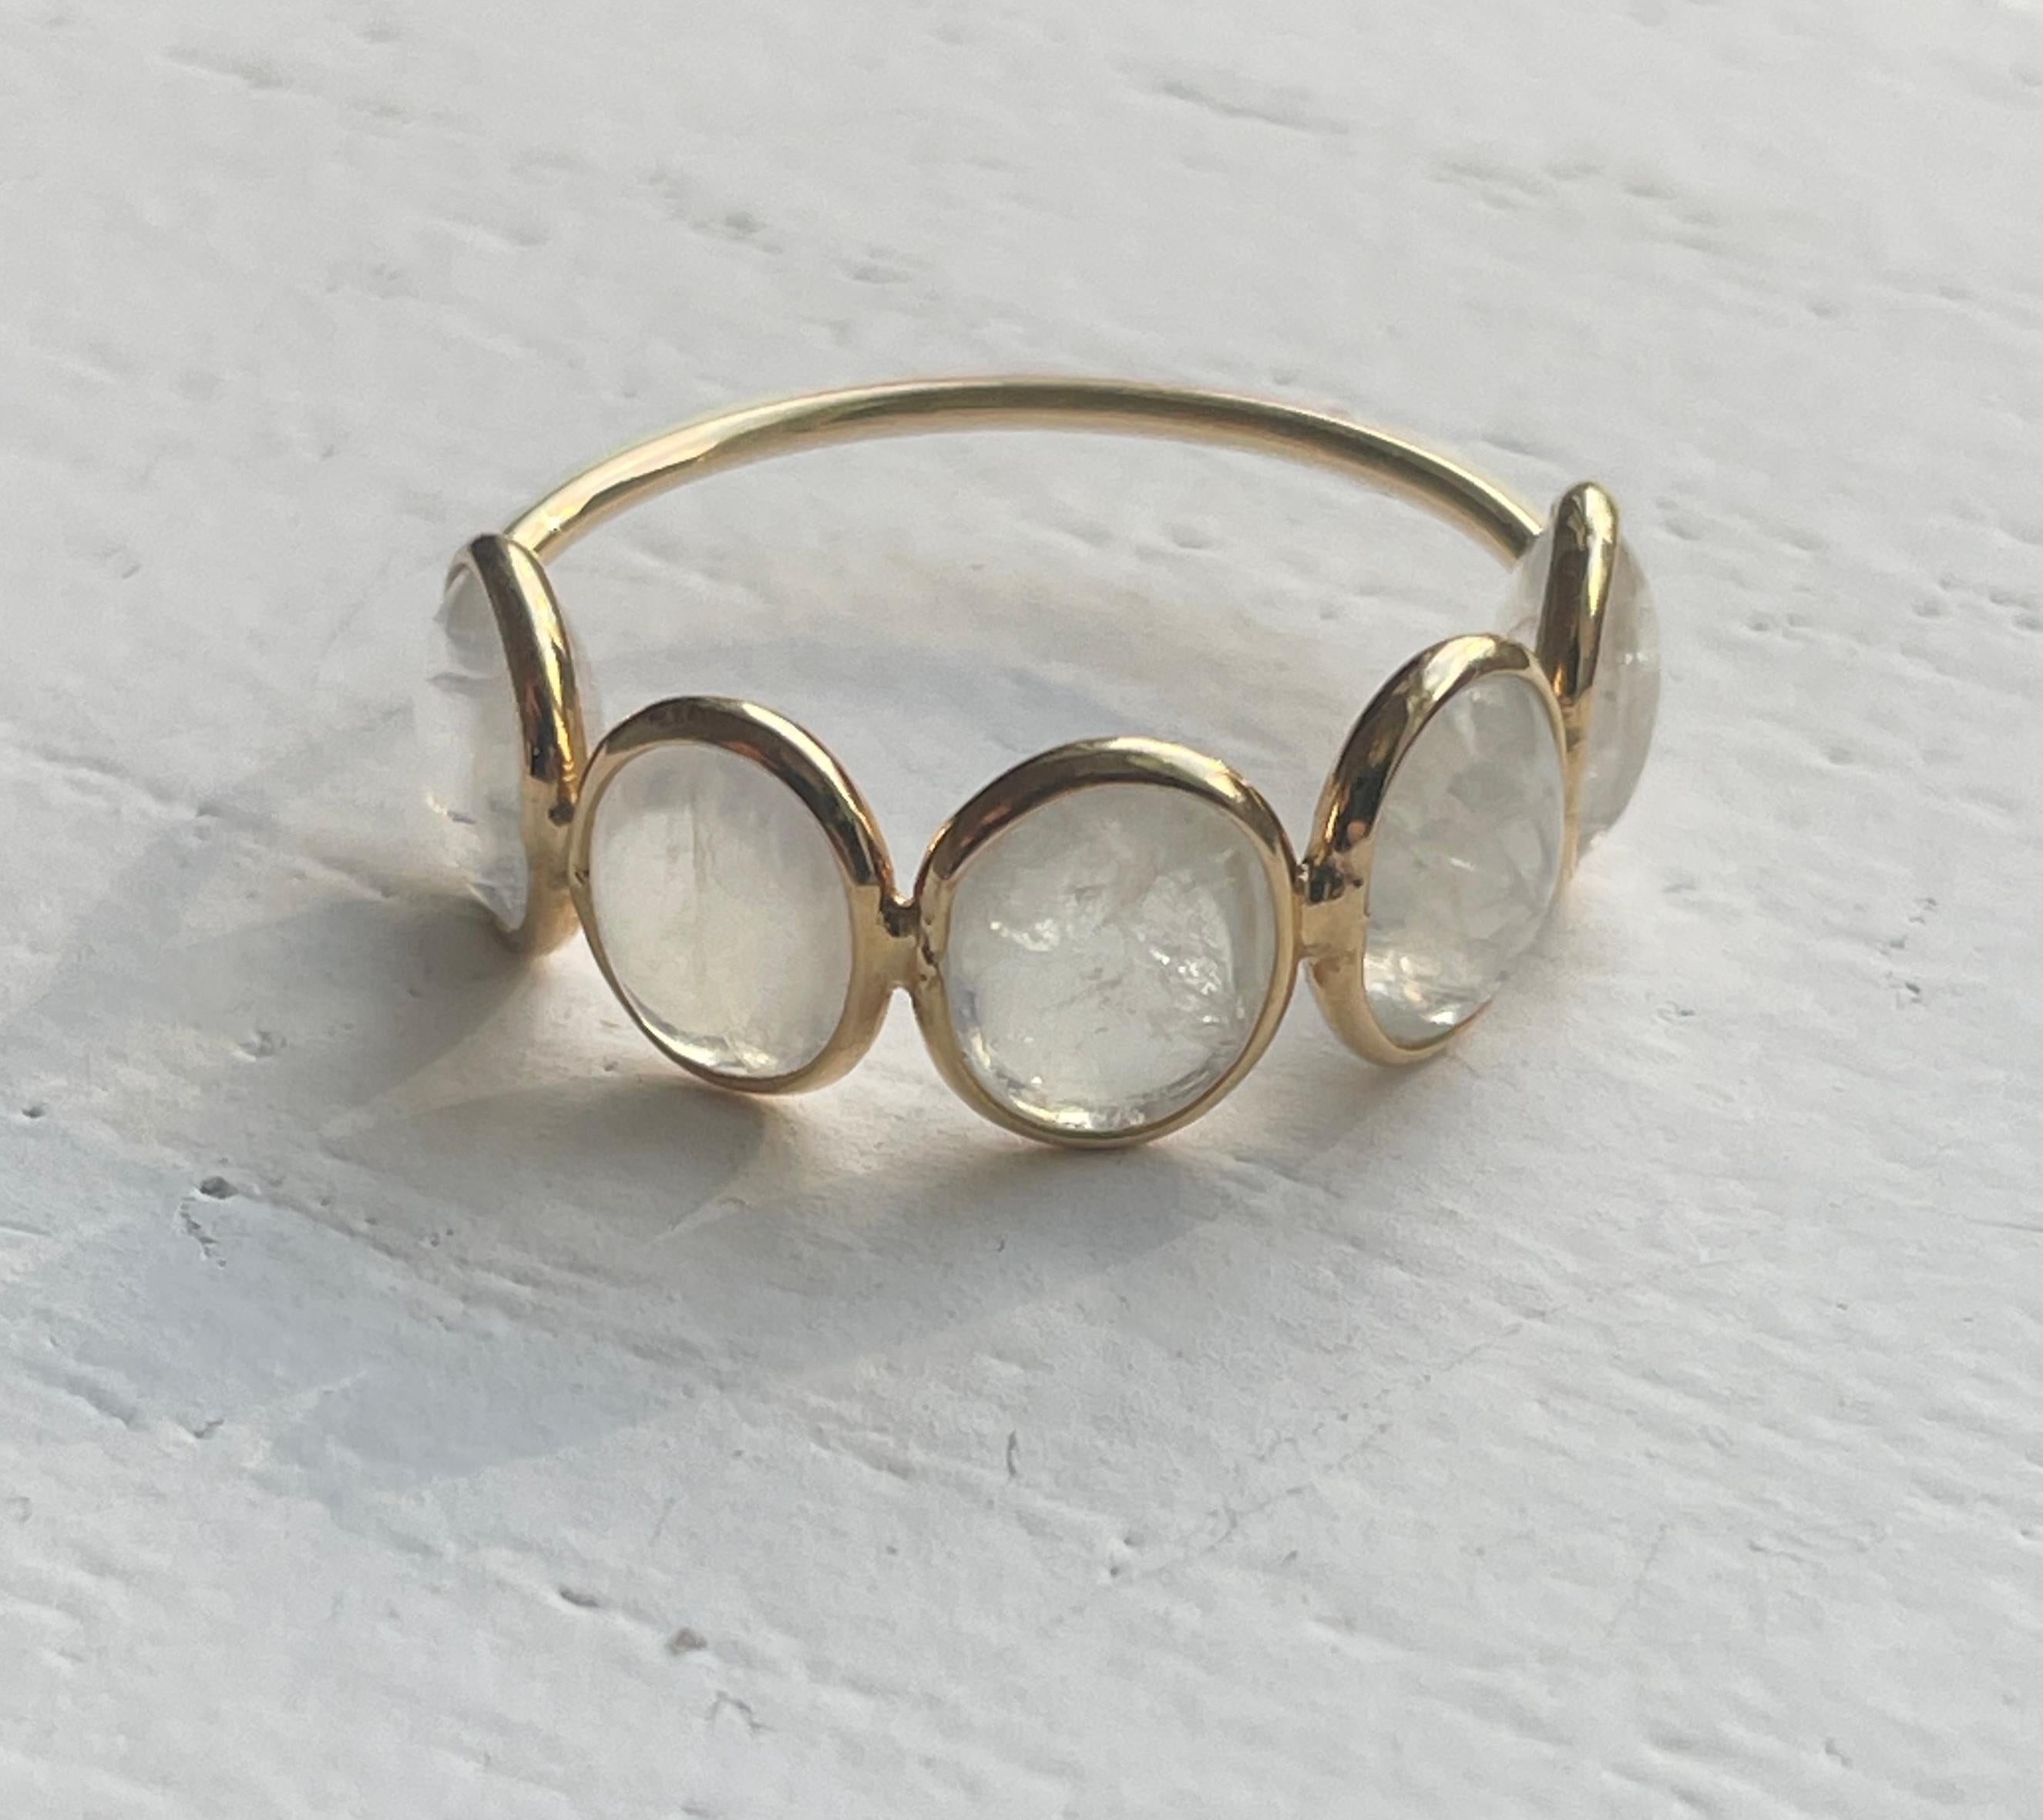 Bezel set in 18K Gold, this cabochon Moonstone showcases maximum sparkle and shine. The ring is comprised of 5 Oval Cabochon stones. The minimal bezel setting allows for the surface of the stone to be exposed creating sparkle and iridescence. As